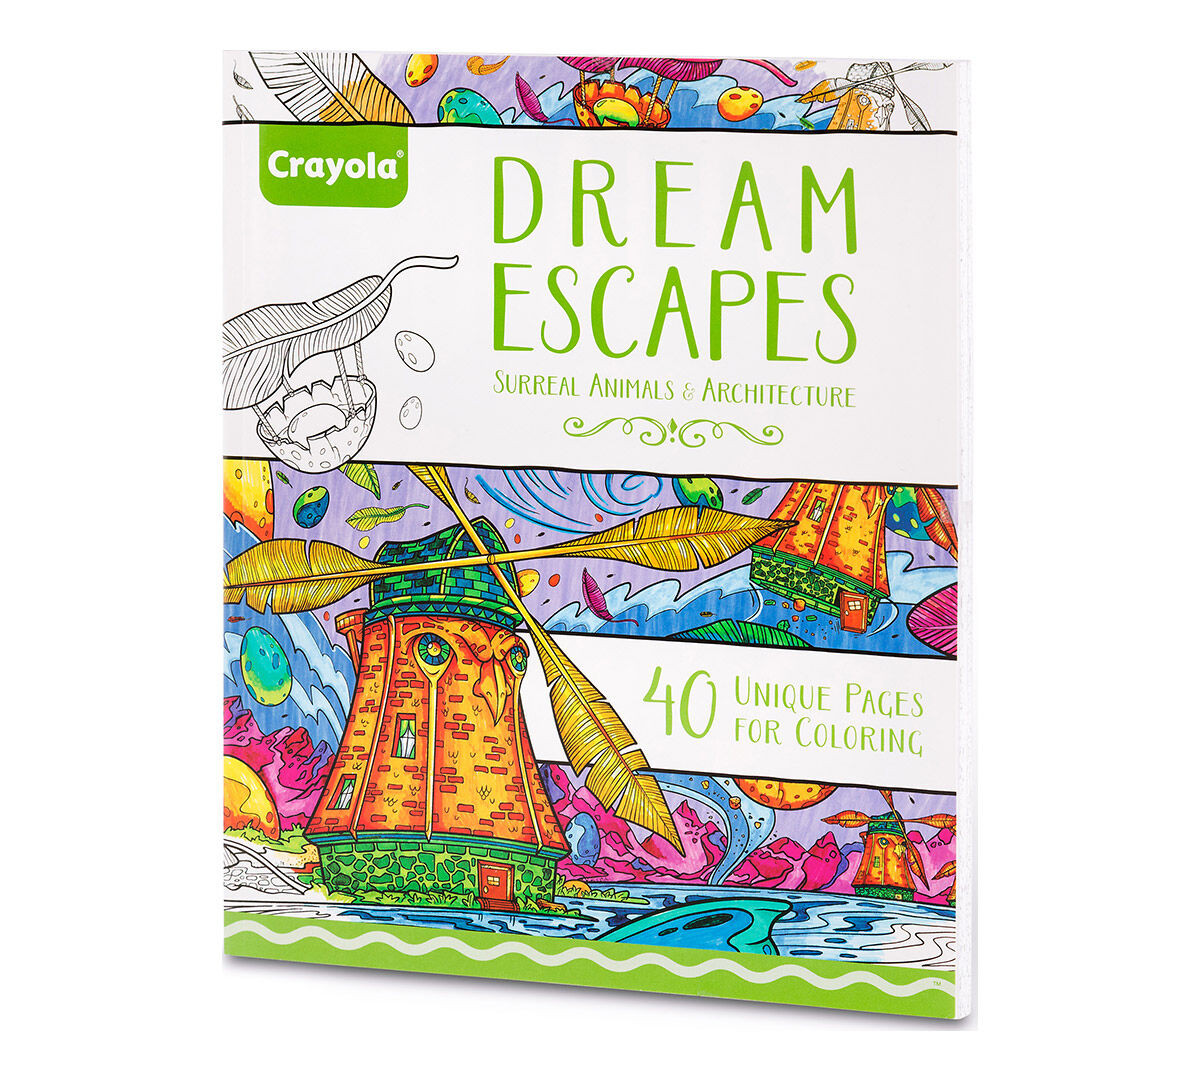 Crayola Adult Coloring Books
 Crayola Dream Escapes Adult Coloring Art Activity 40